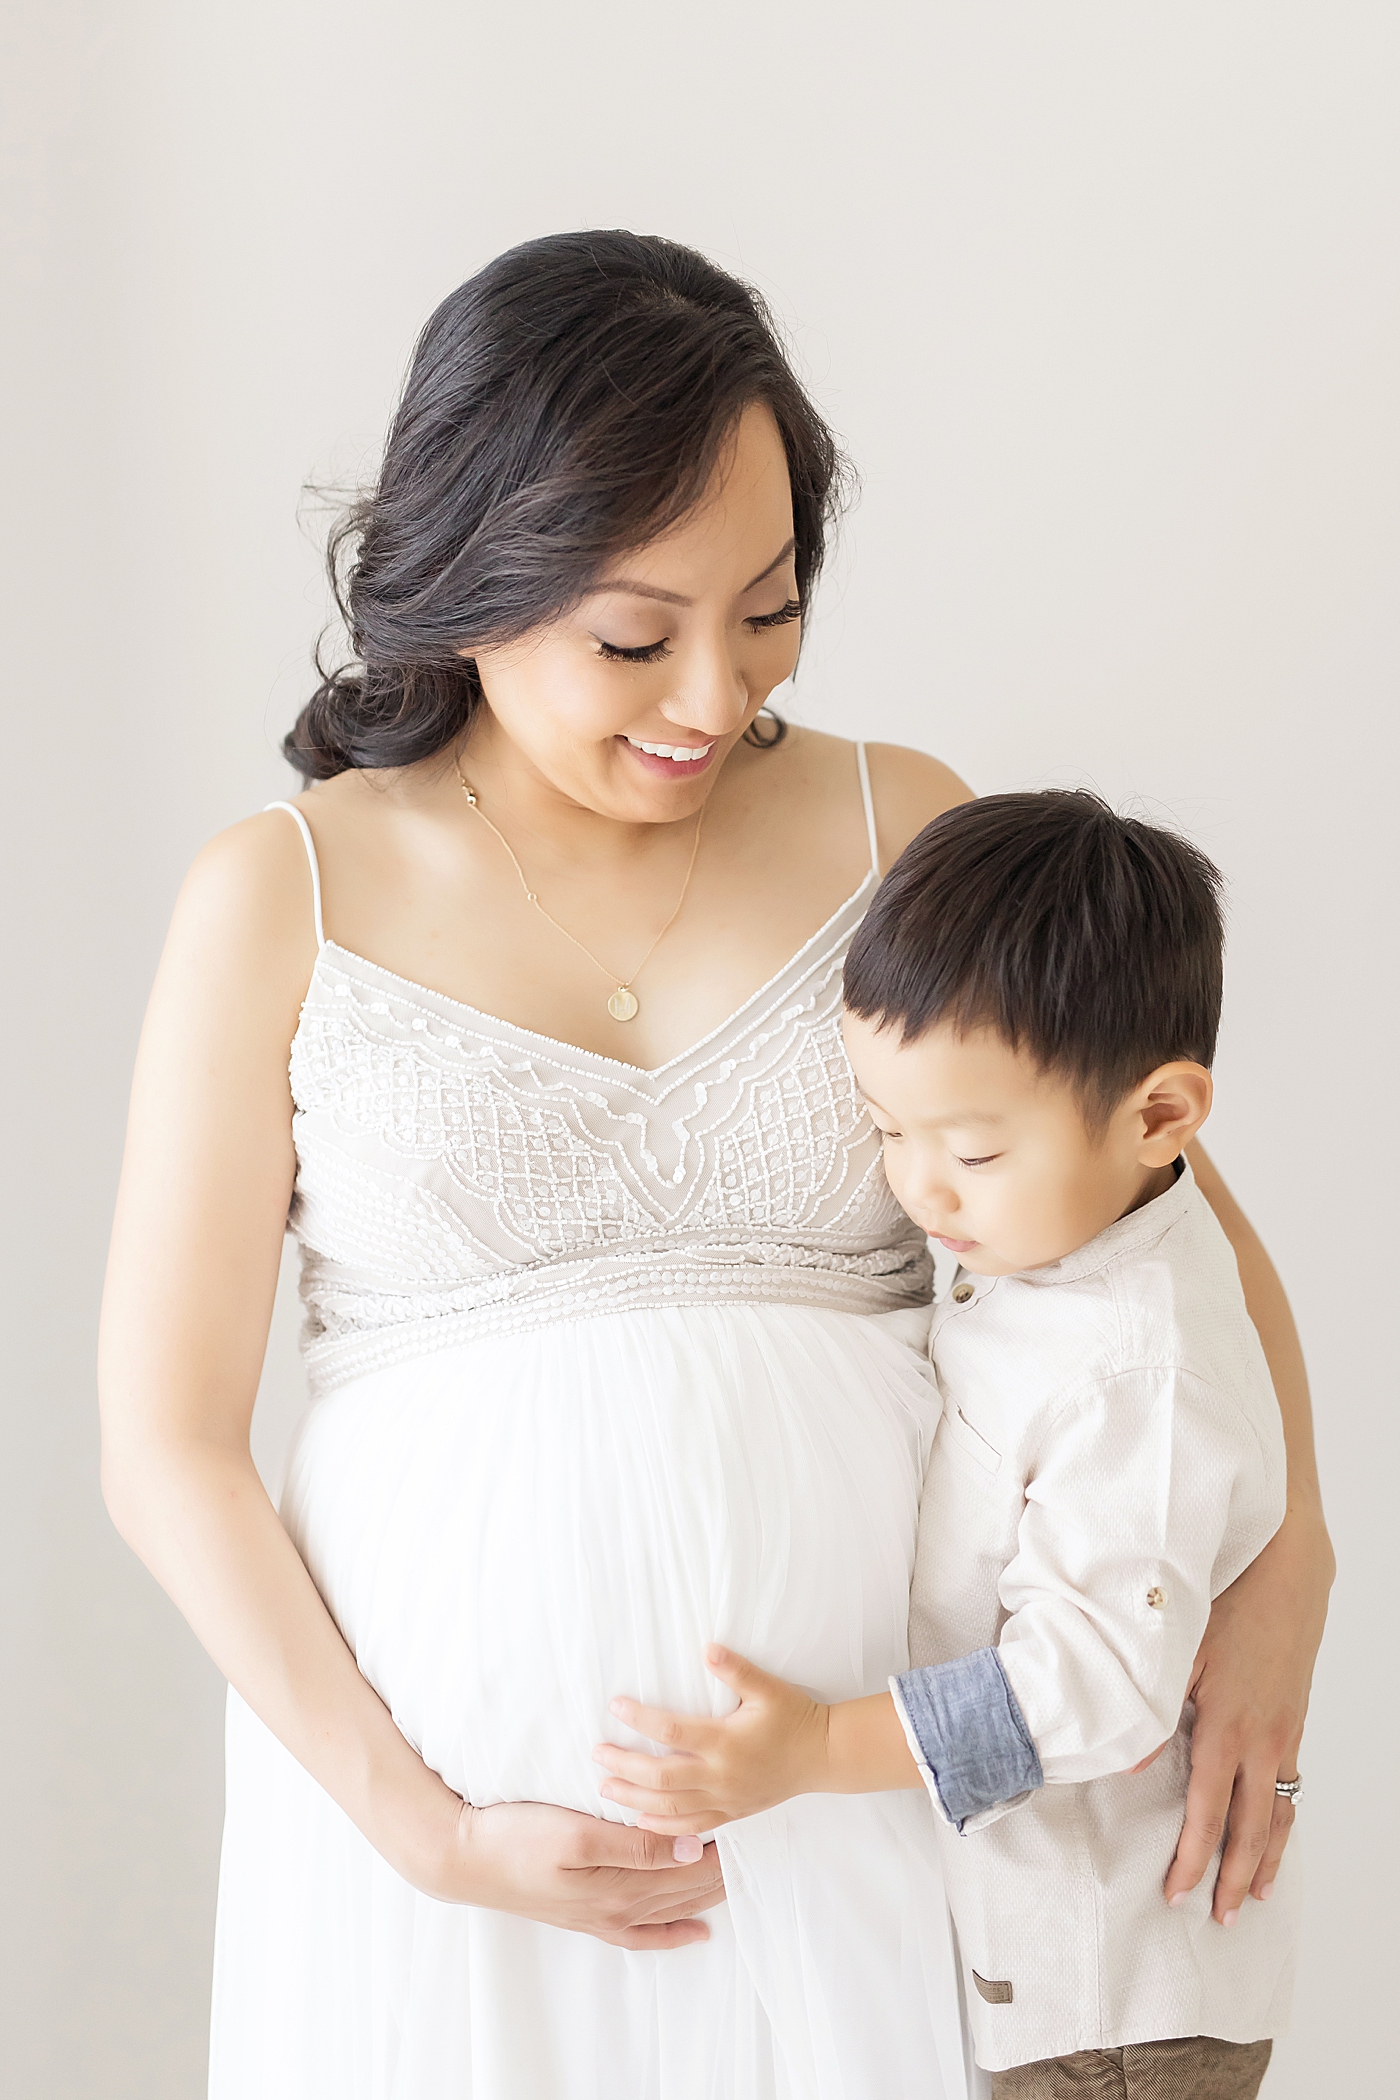 Mom and her first born son sharing a sweet moment during maternity photos with Fresh Light Photogrpahy.